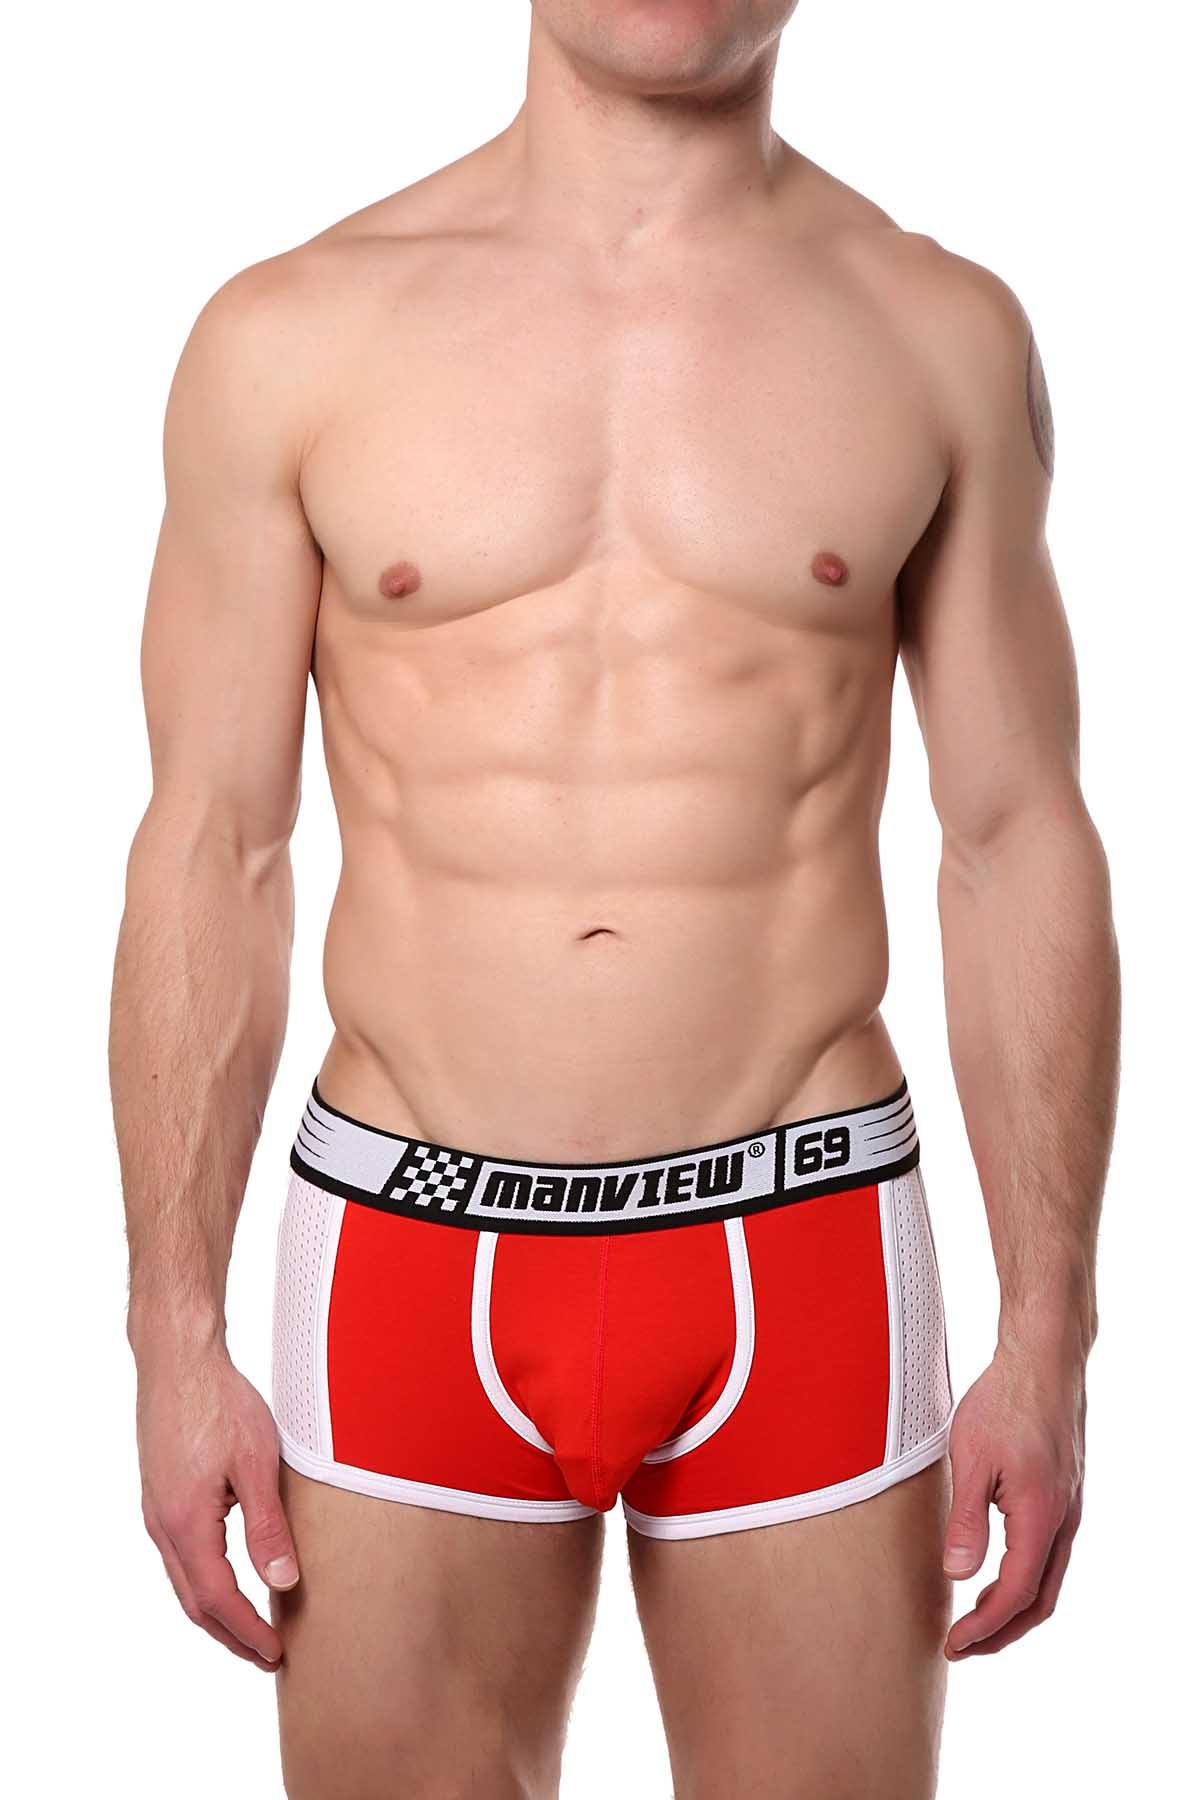 Manview Red 69 Racer Trunk